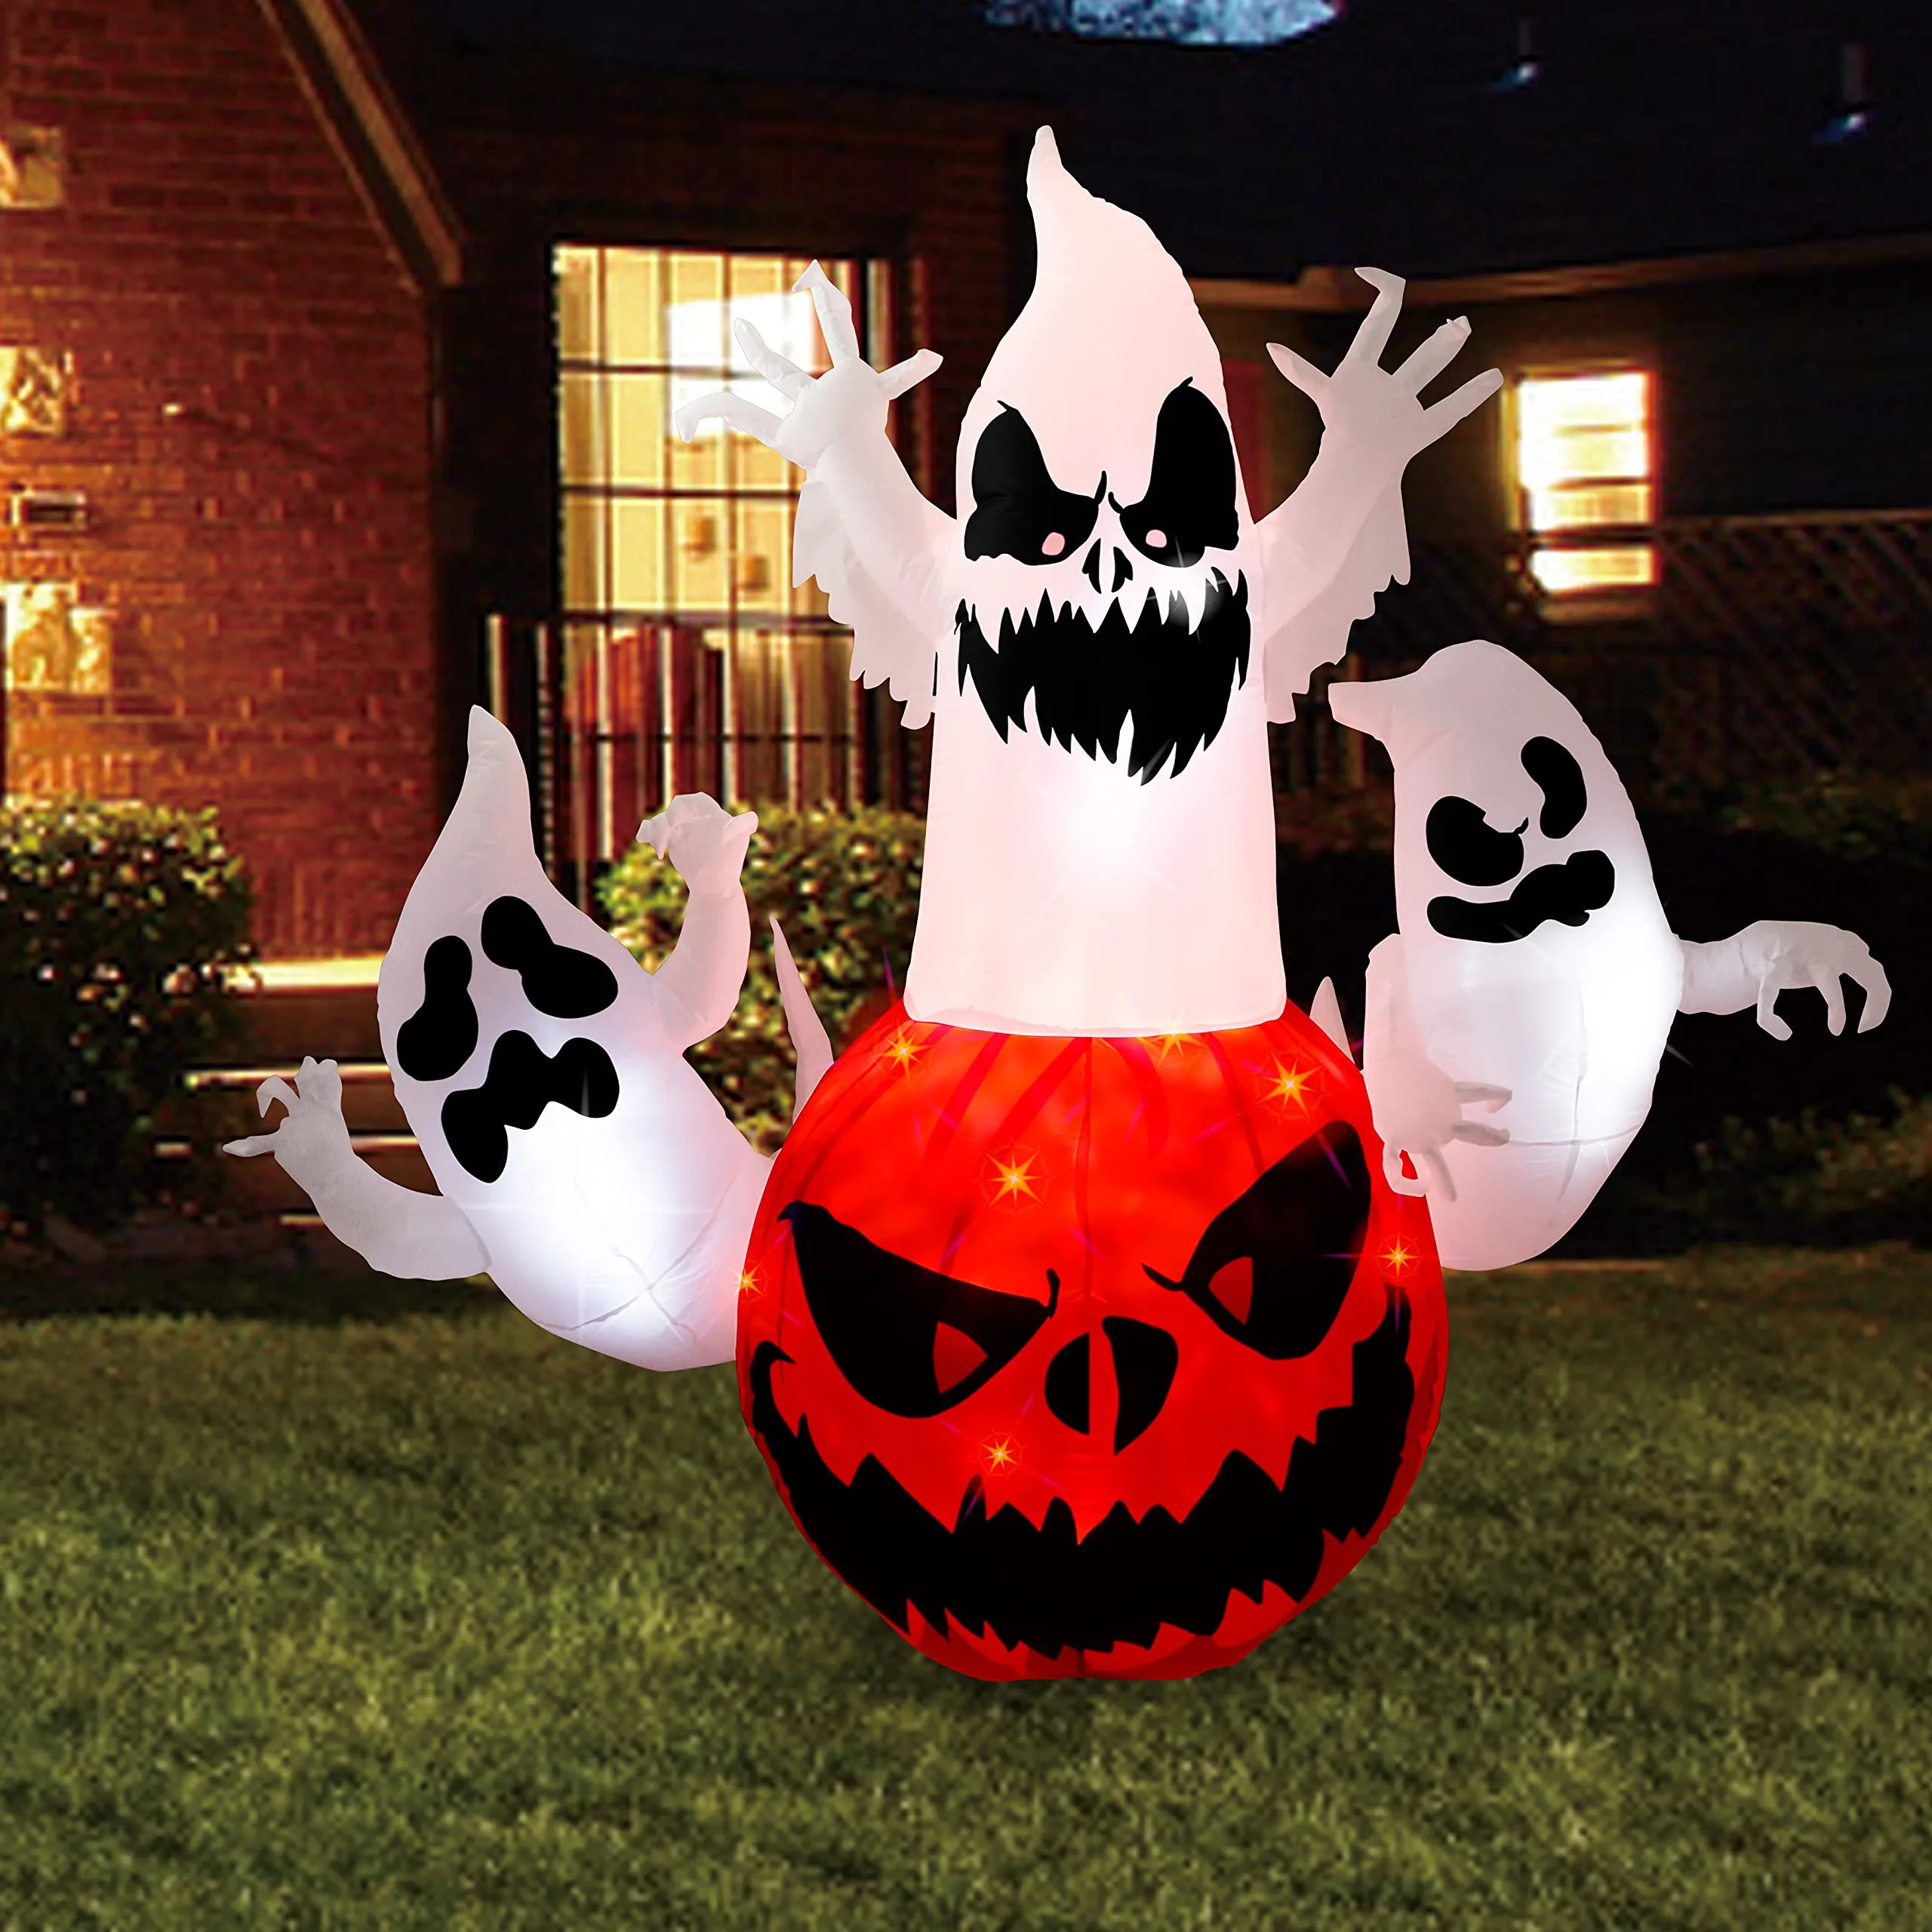 You are currently viewing Inflatable Halloween Decorations: Spooktacular Yard Decor Ideas